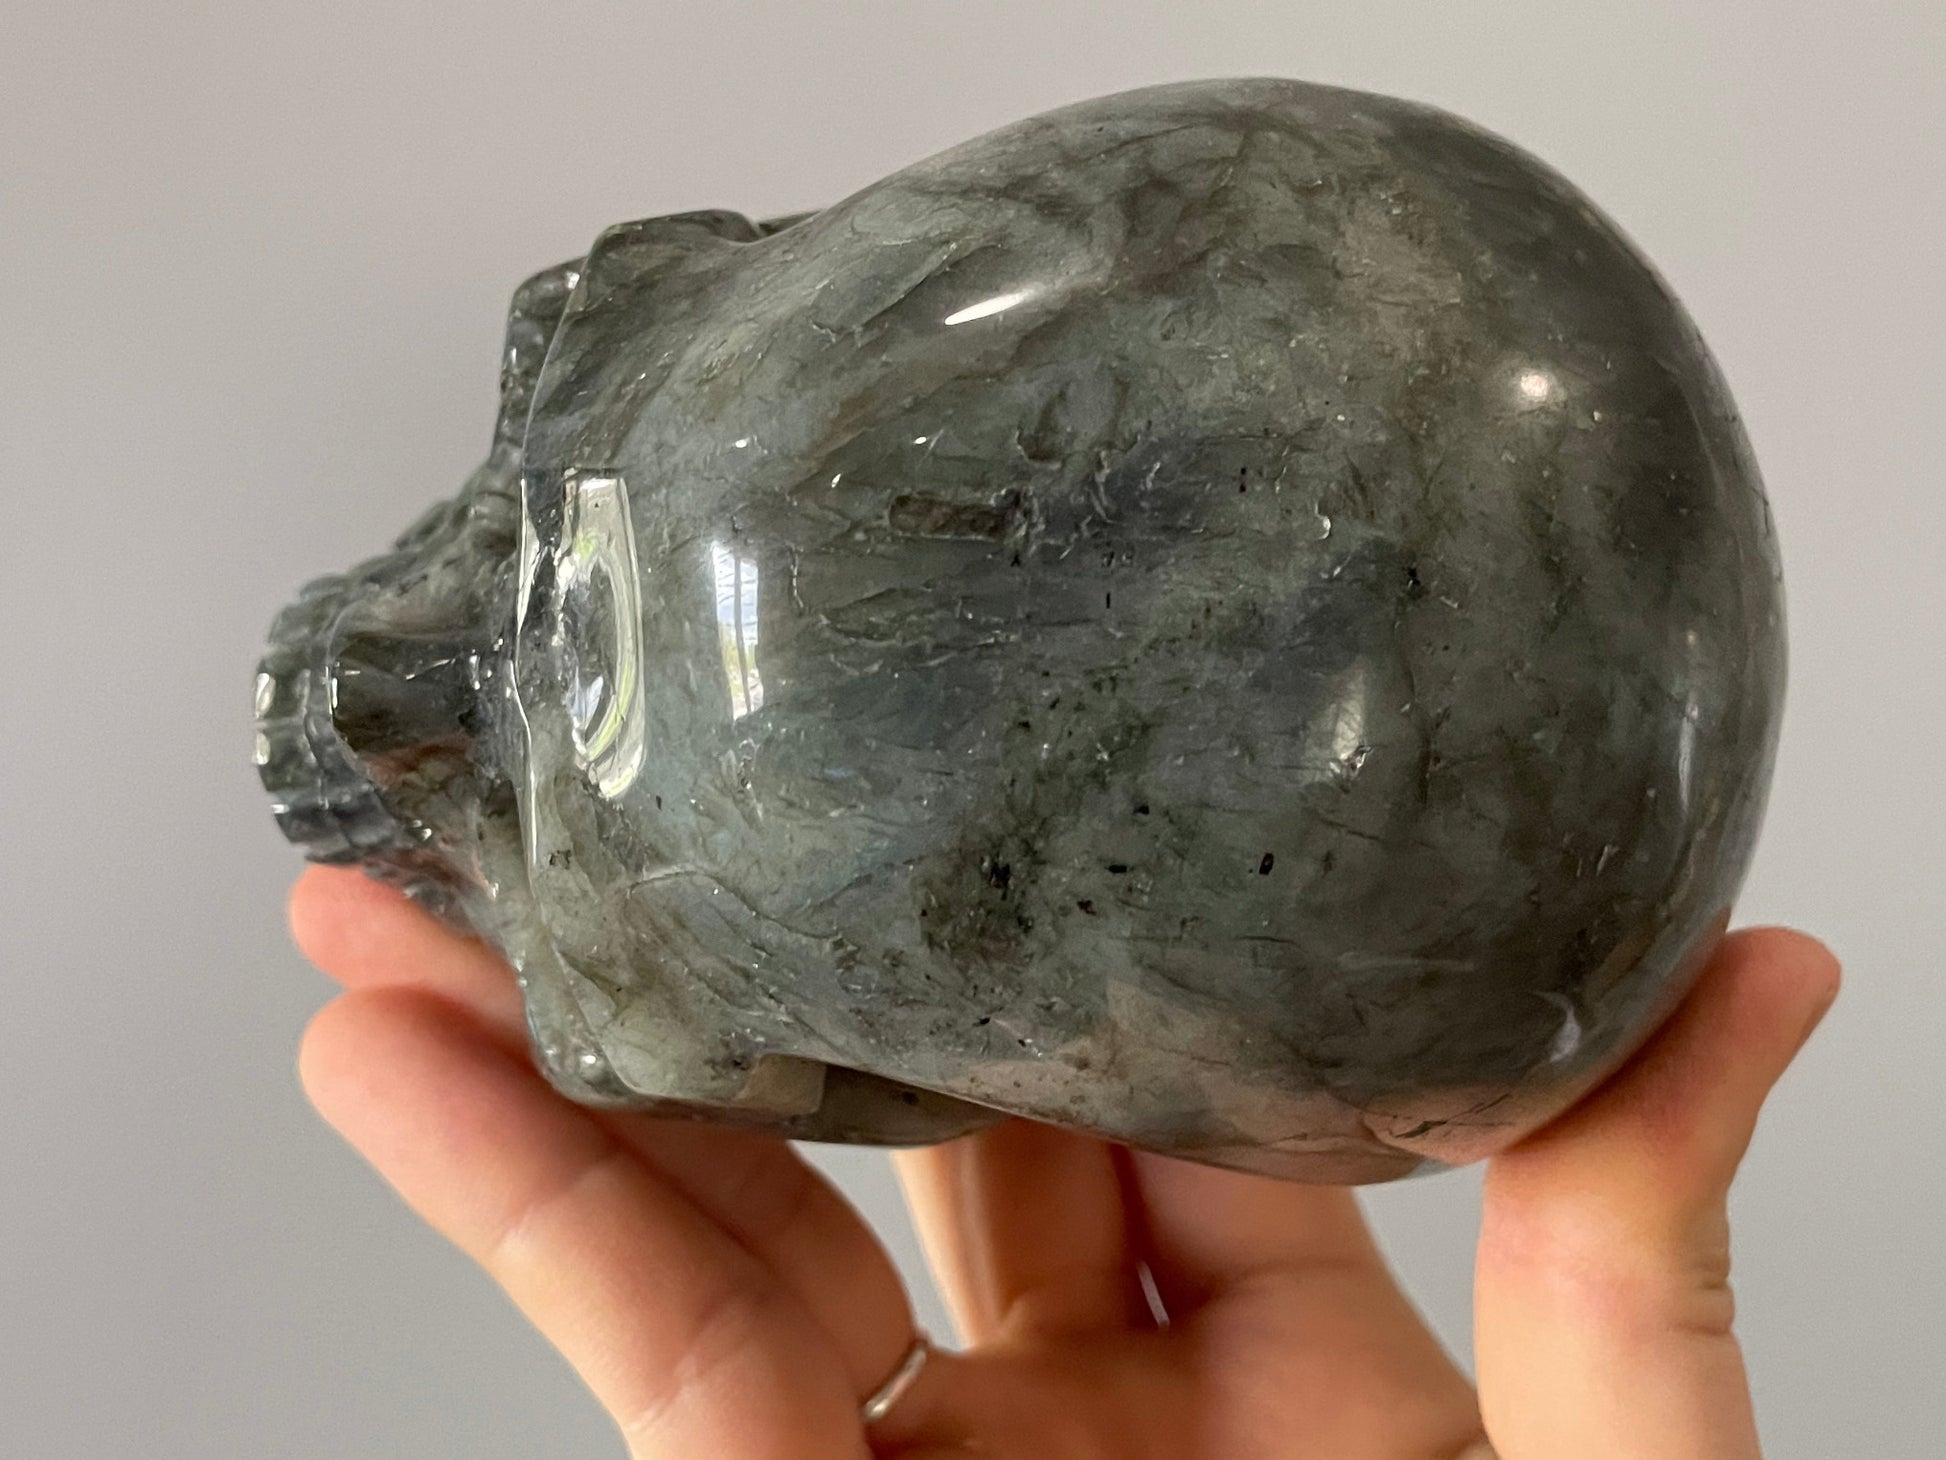 Pictured is a large skull carved out of labradorite with blue and green and purple and yellow flashes.